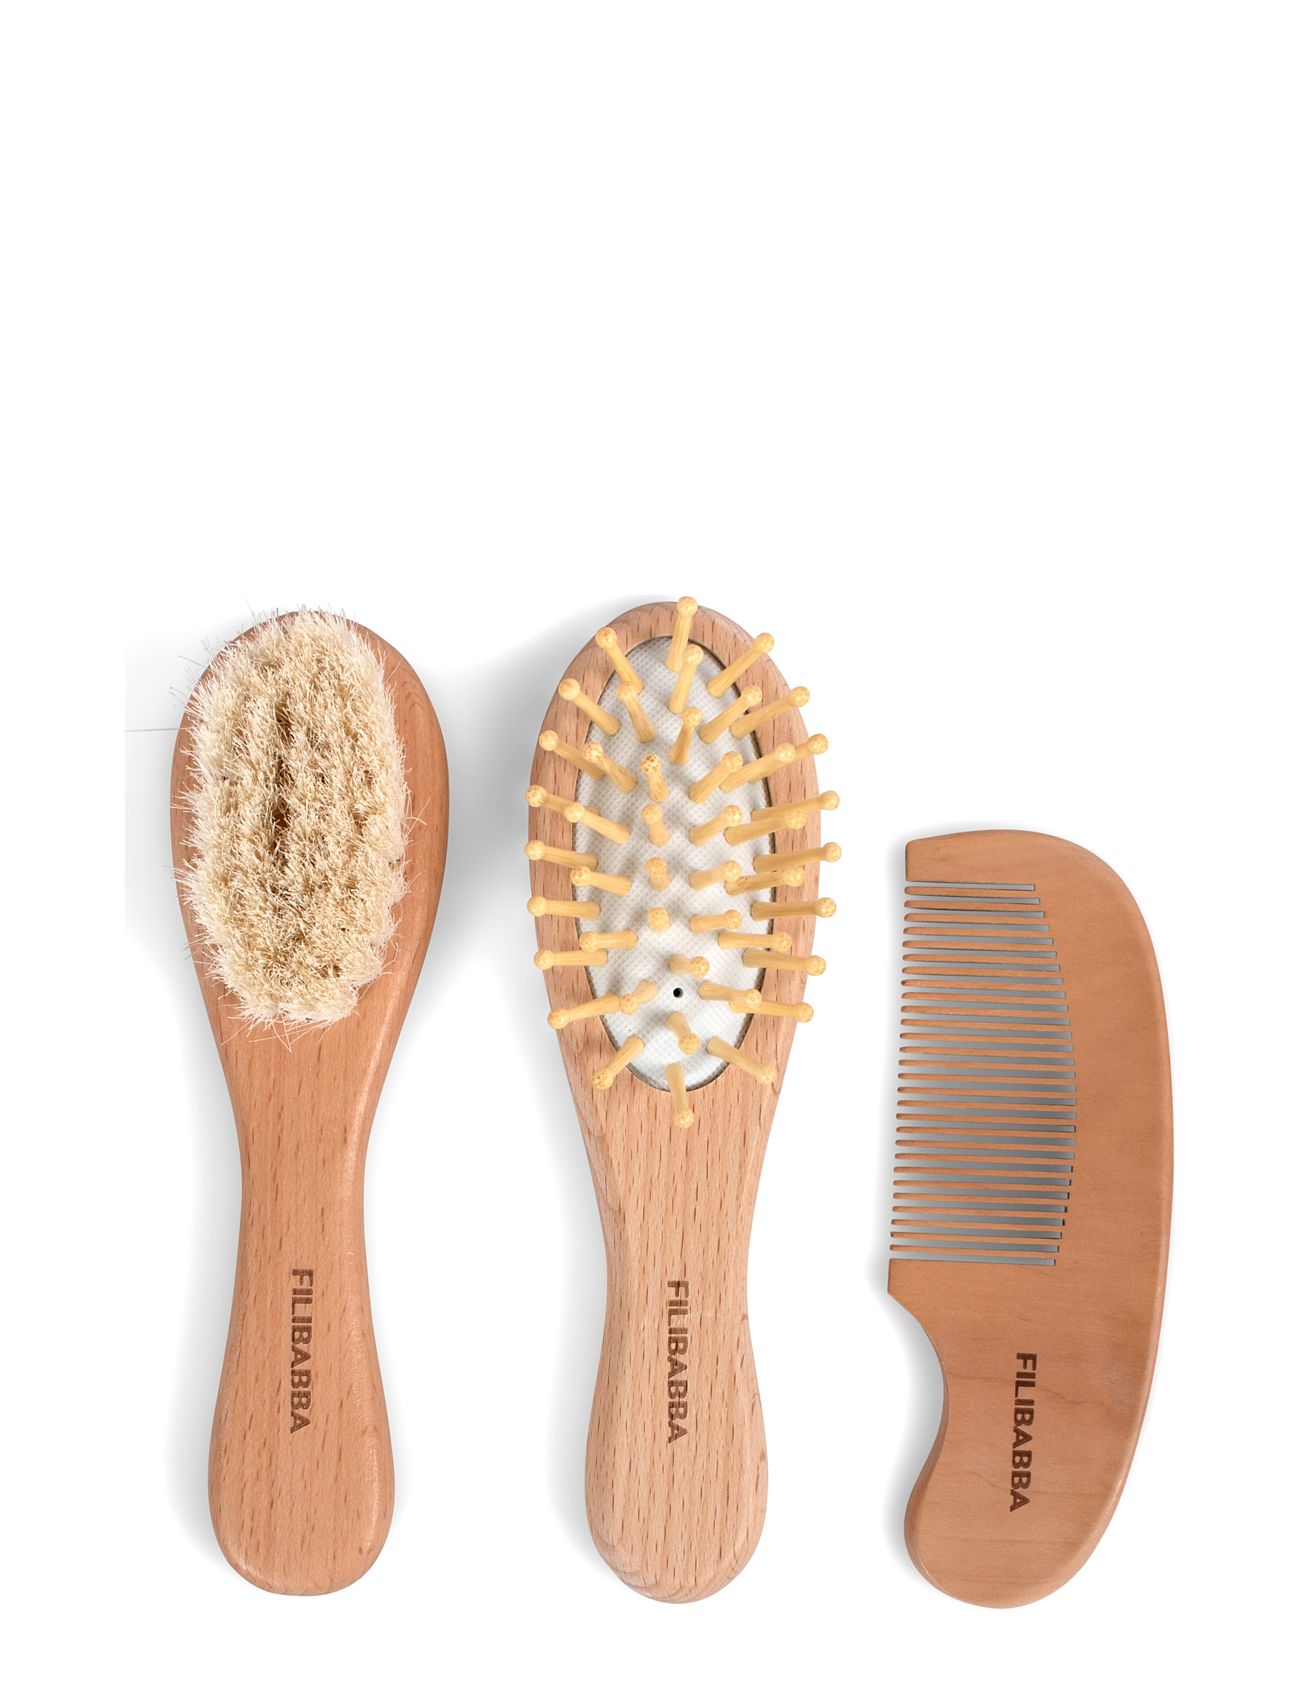 Baby Brush And Comb Set Baby & Maternity Care & Hygiene Baby Care Multi/patterned Filibabba